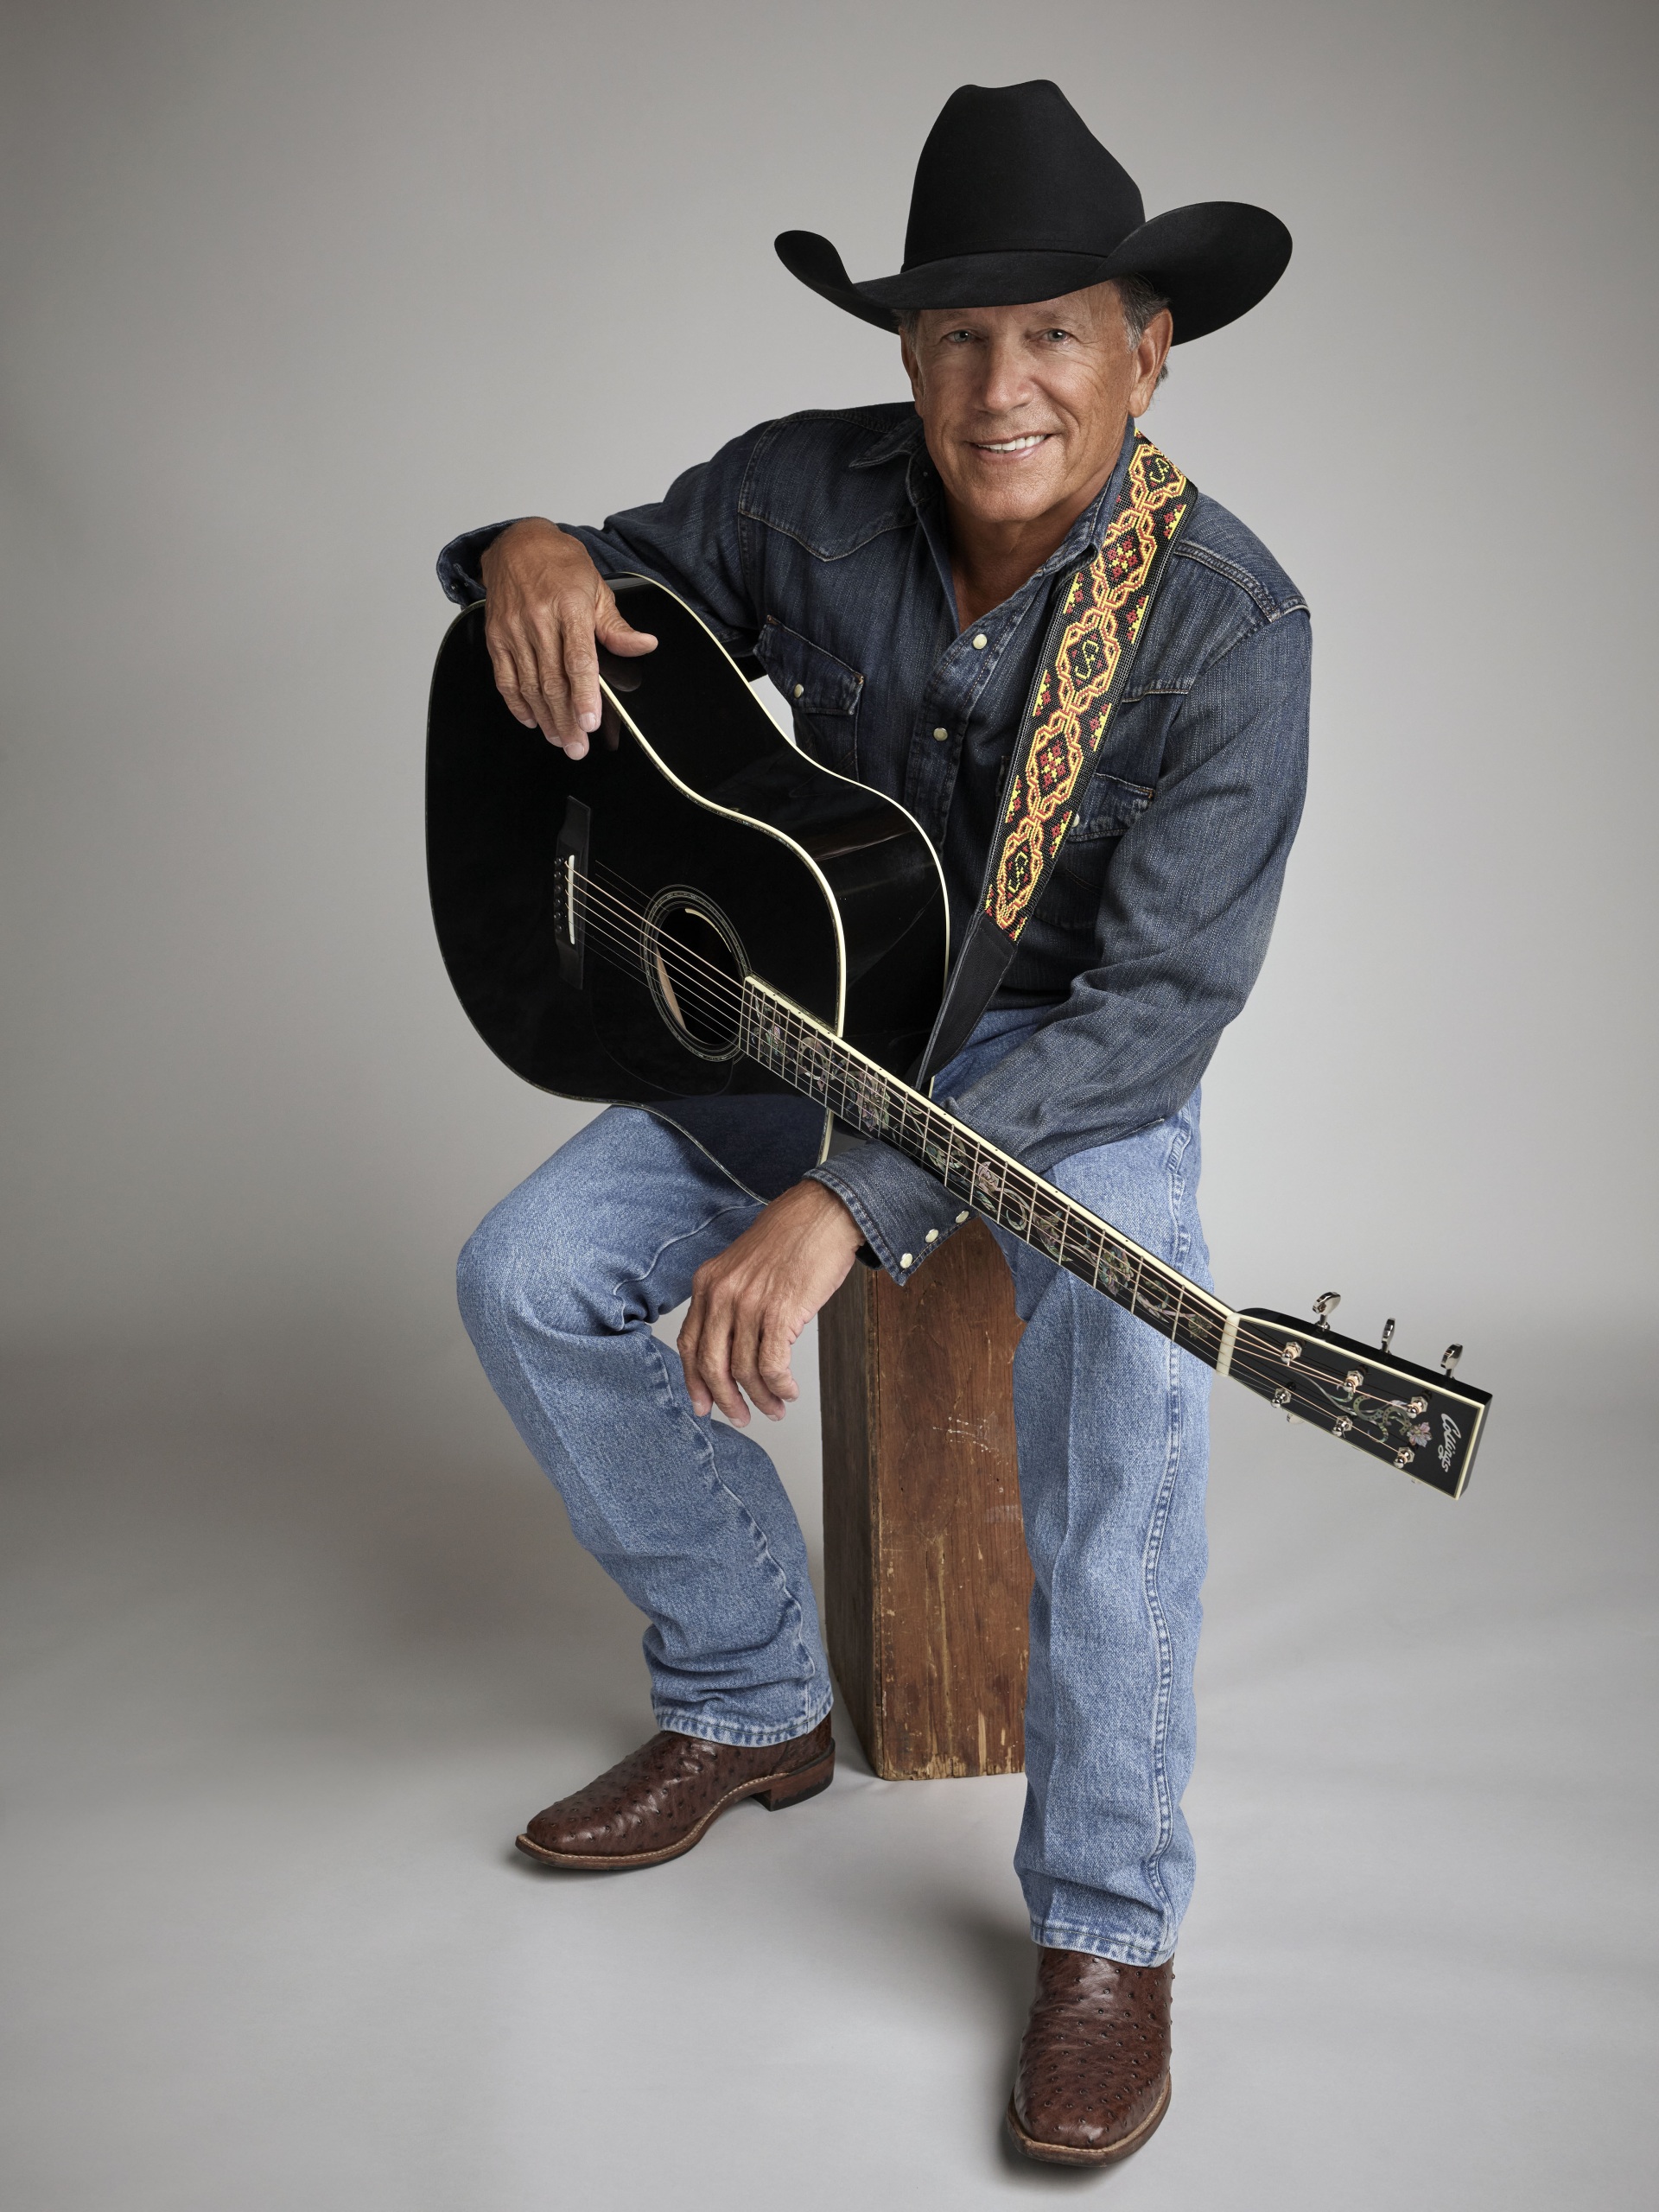 GEORGE STRAIT RELEASES NEW SONG “MIA DOWN IN MIA” FROM HIGHLY ANTICIPATED  COWBOYS AND DREAMERS.